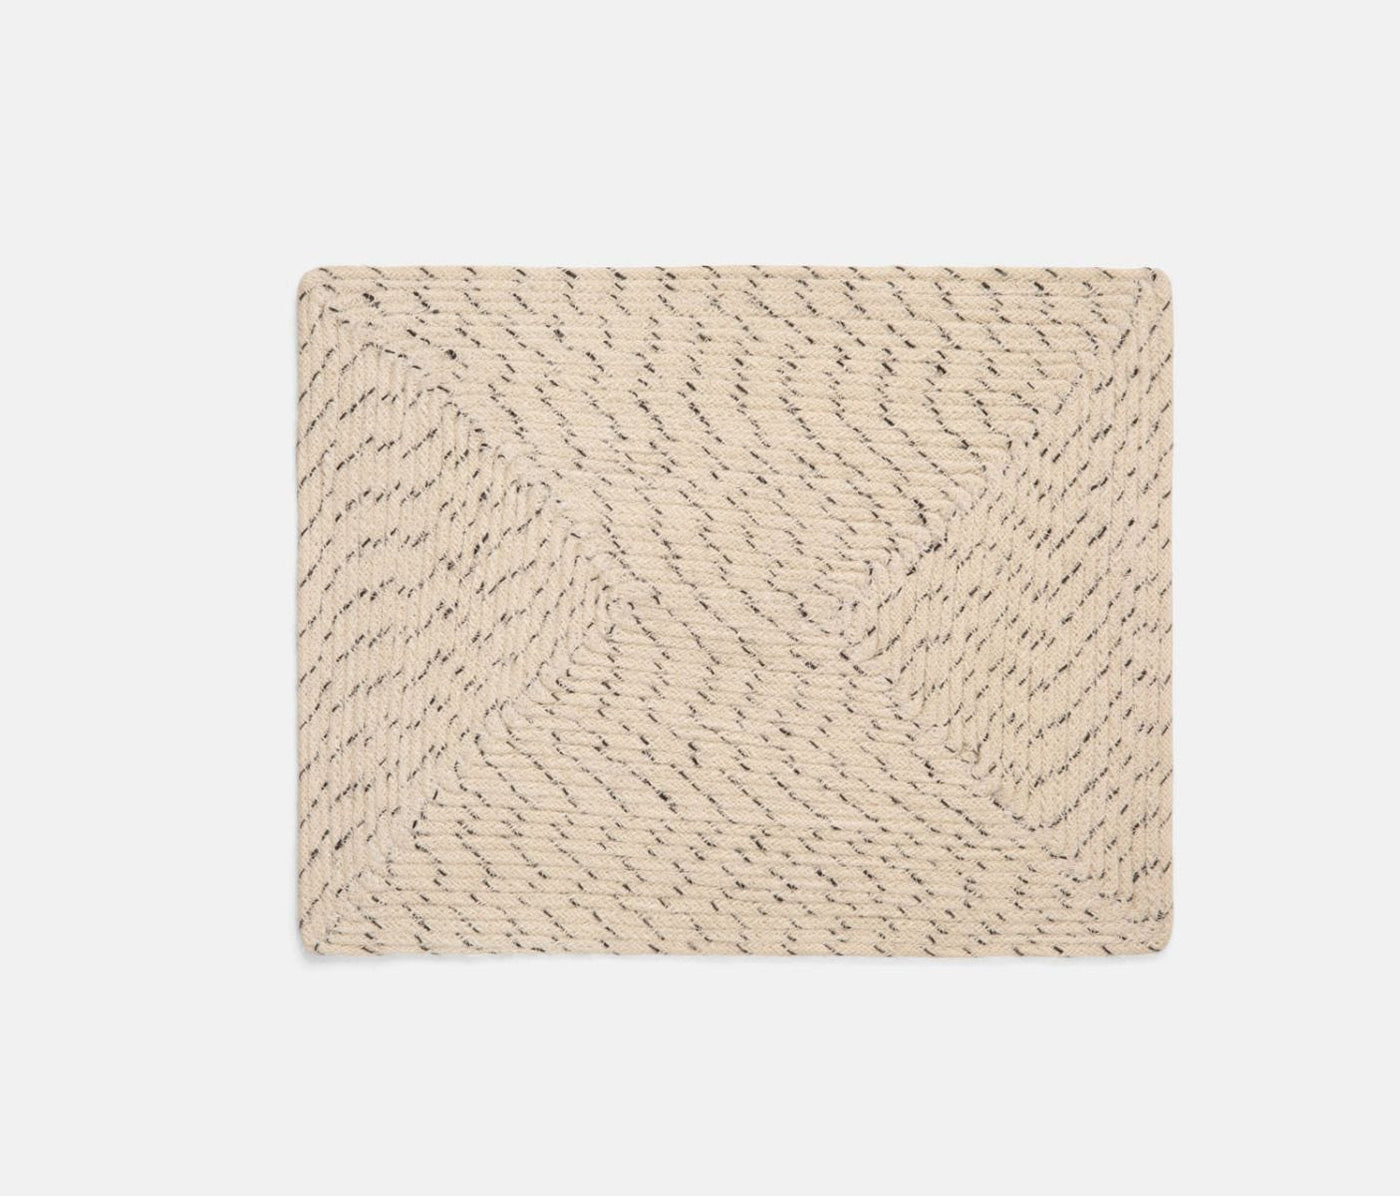 PLACEMAT SPECKLED WHITE JUTE